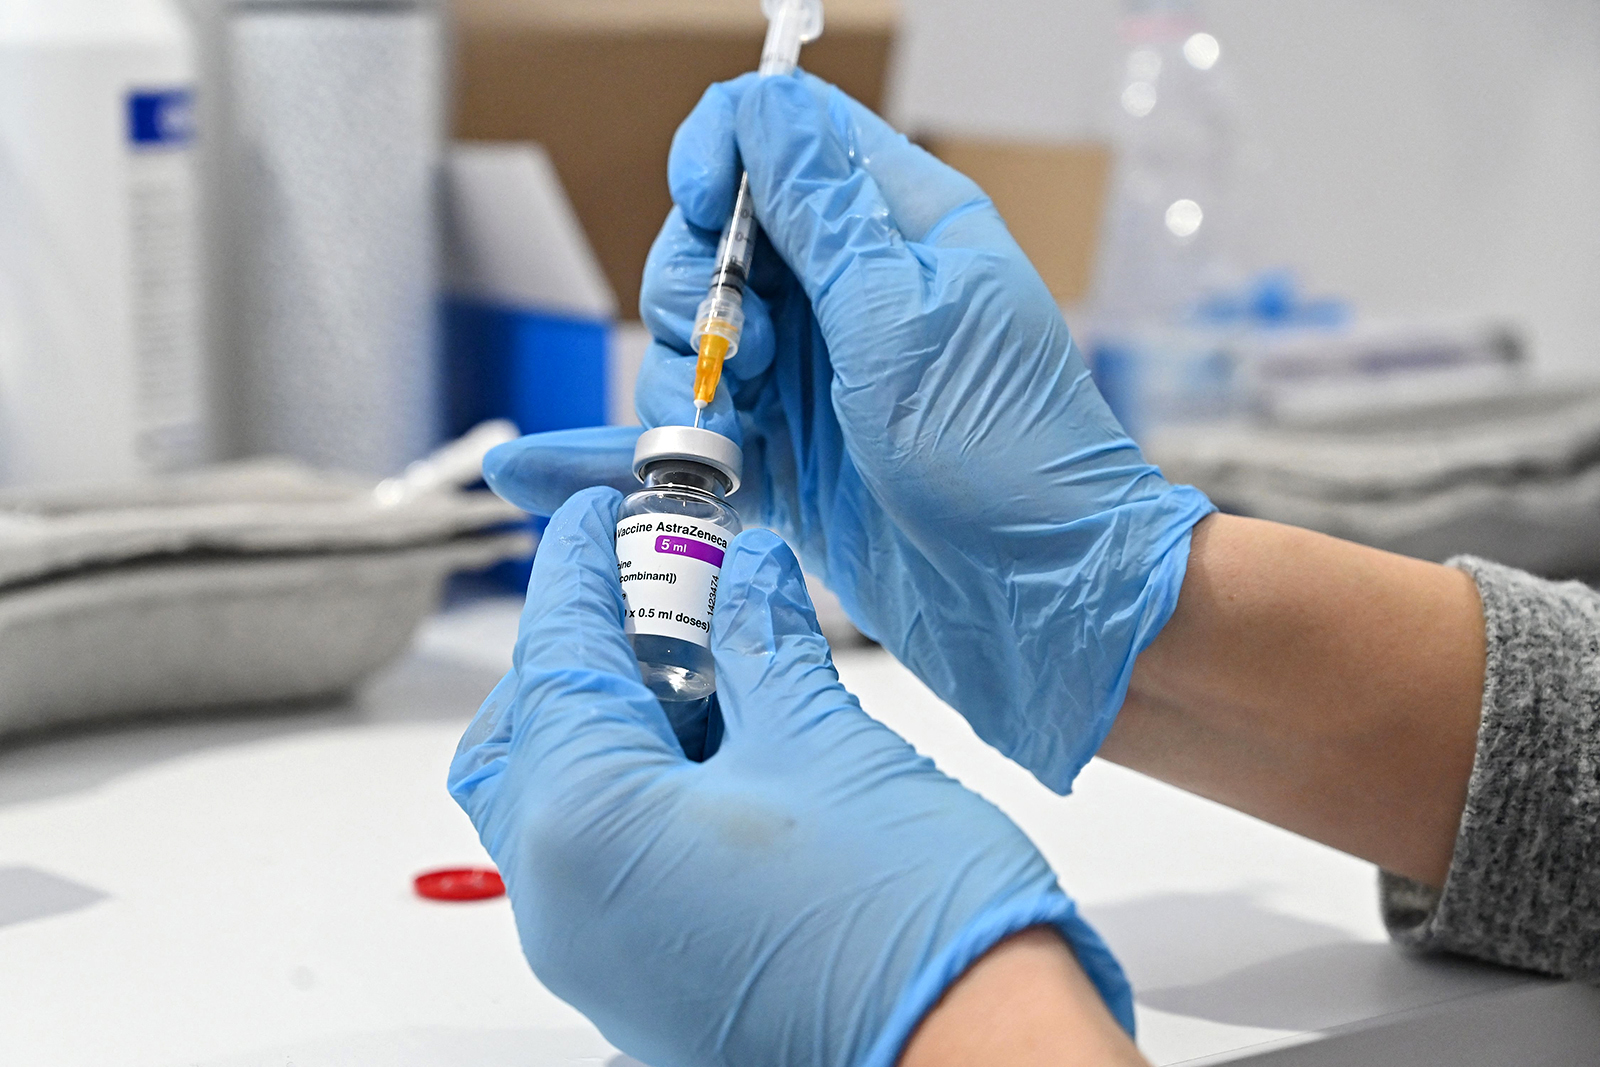 A medical worker fills a syringe from a vial of the AstraZeneca Covid-19 vaccine in Rome, on March 24.